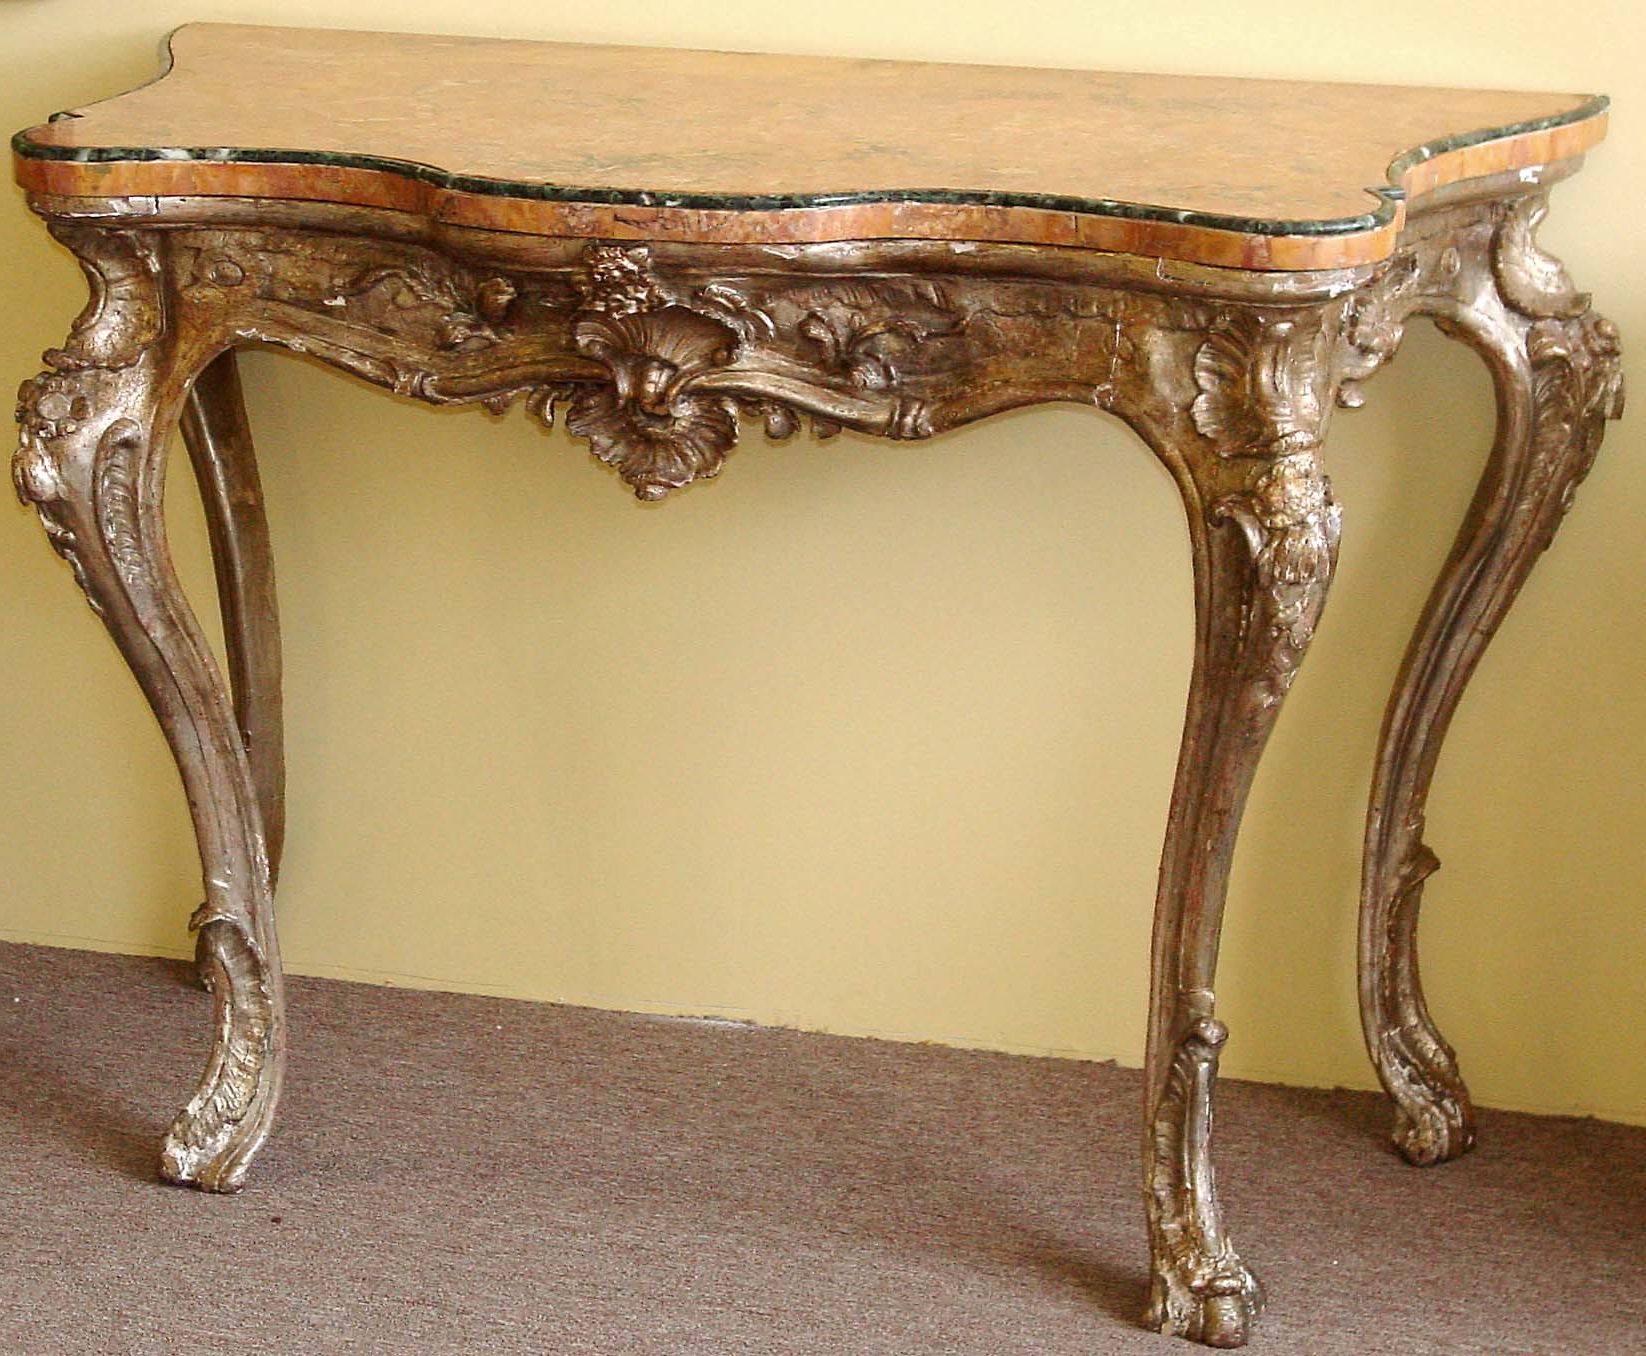 Antiqued Gold Leaf Coffee Tables Regarding Well Known Northern Italian, Rococo Period, Silver Leaf Console Table For Sale (View 8 of 10)